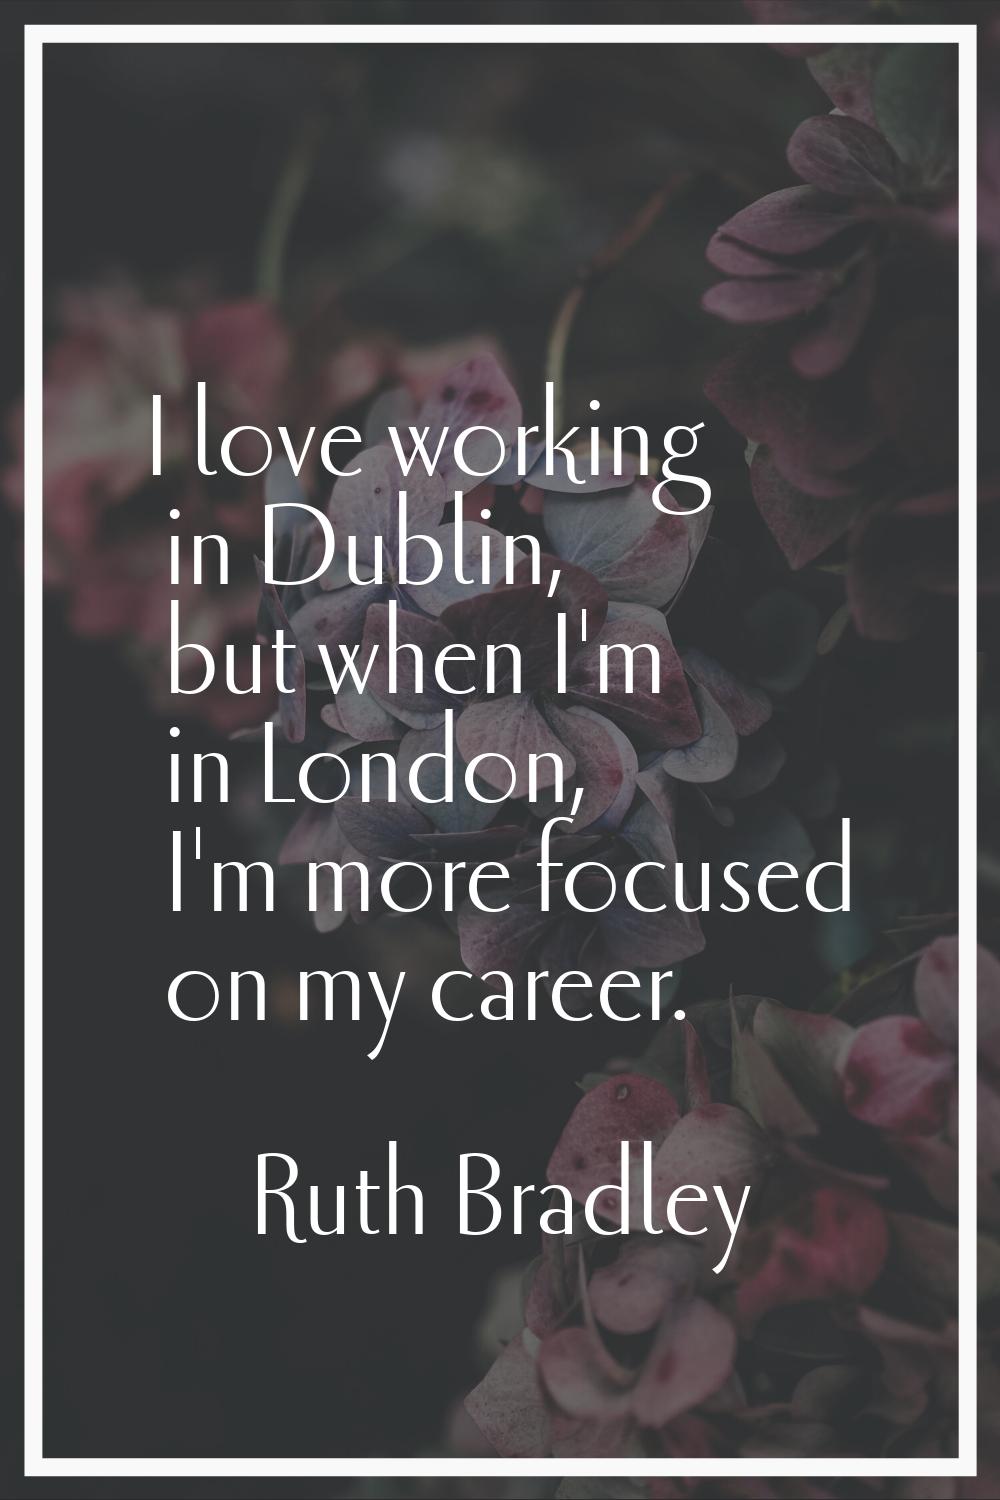 I love working in Dublin, but when I'm in London, I'm more focused on my career.